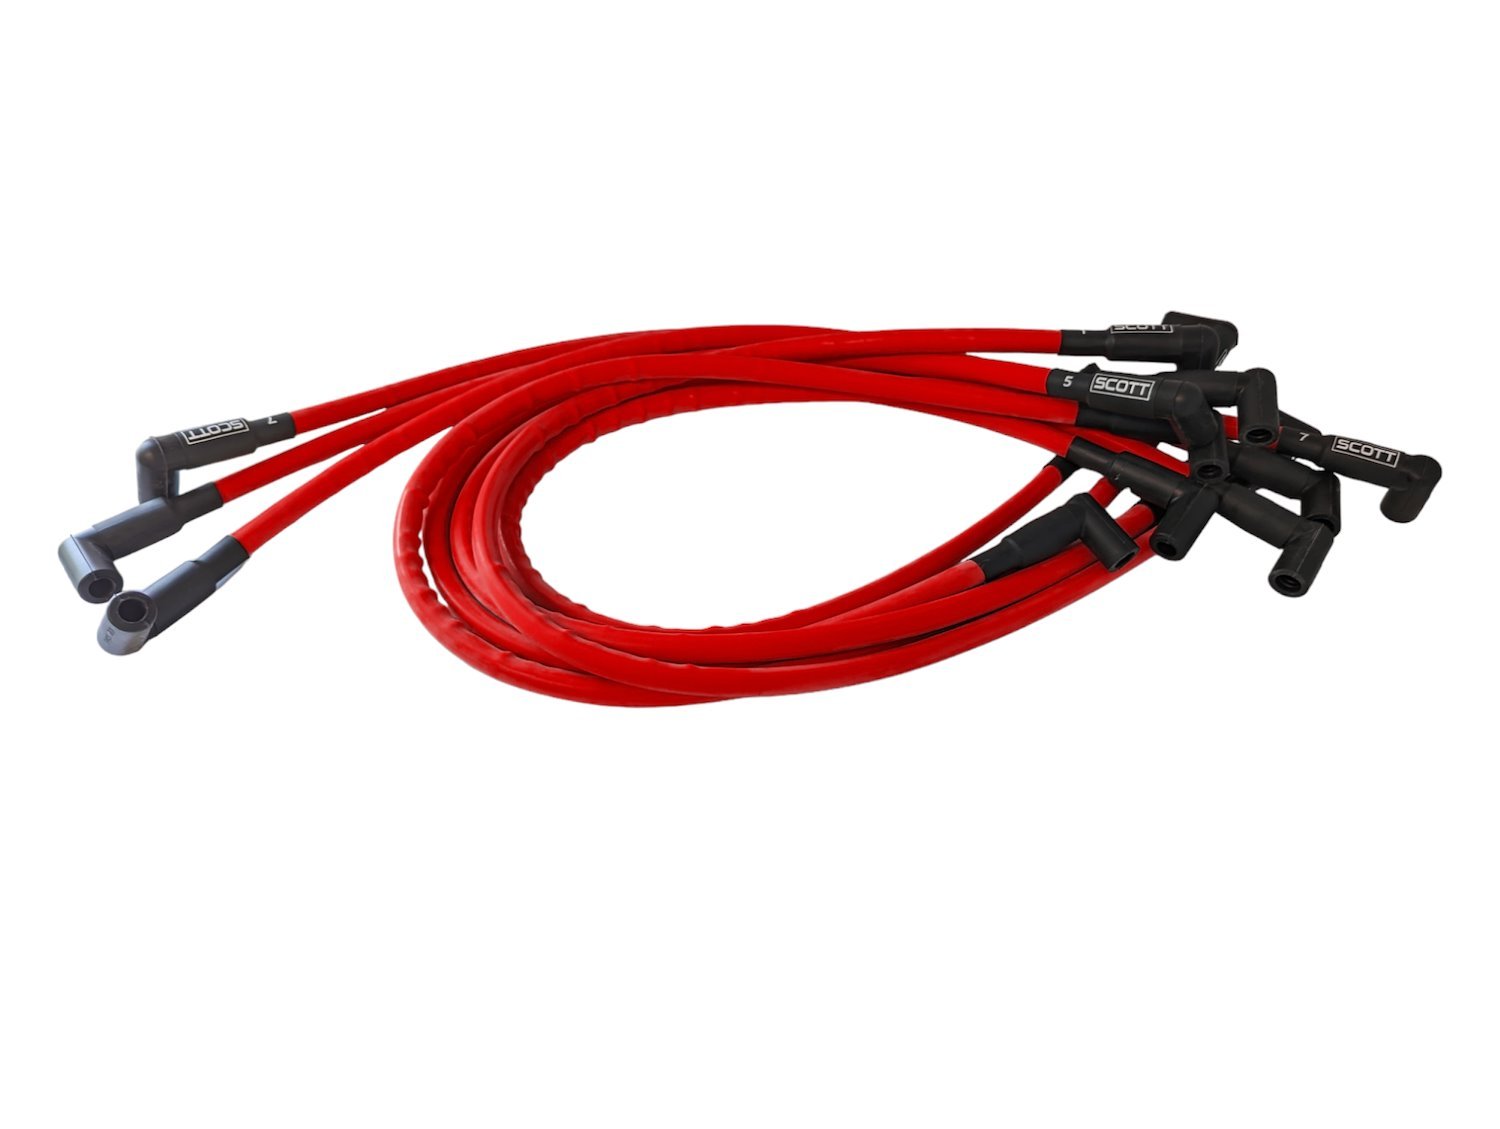 SPW-CH-439-2 High-Performance Silicone-Sleeved Spark Plug Wire Set for Small Block Ford, Under Header [Red]